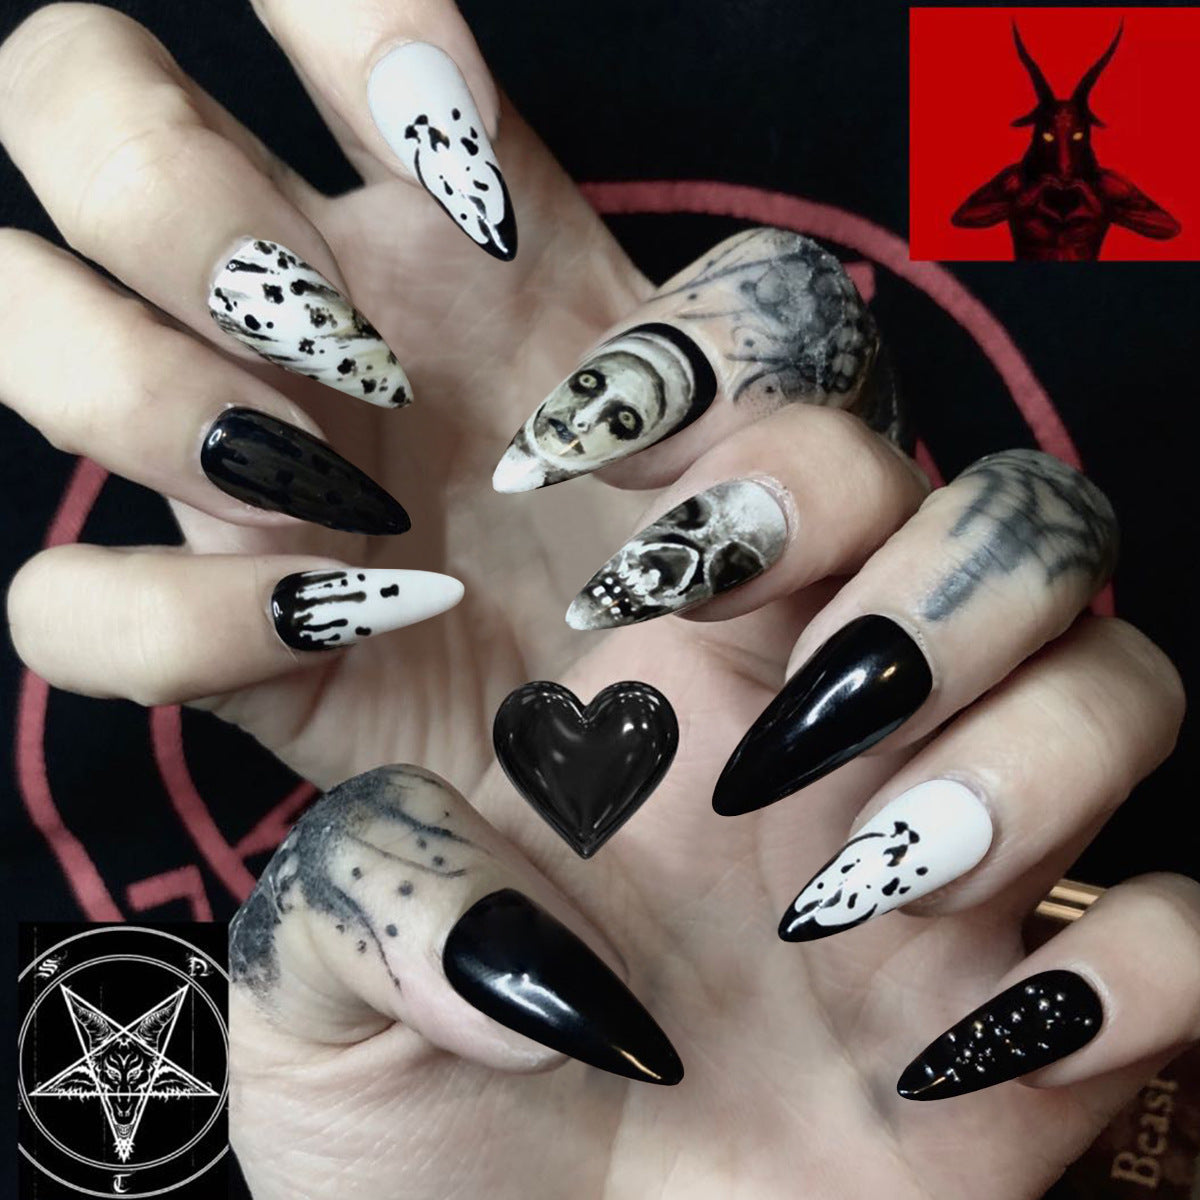 24 Pcs Short False Nails For One Set . Buy 5 Get 1 Free .Code is : Nails05